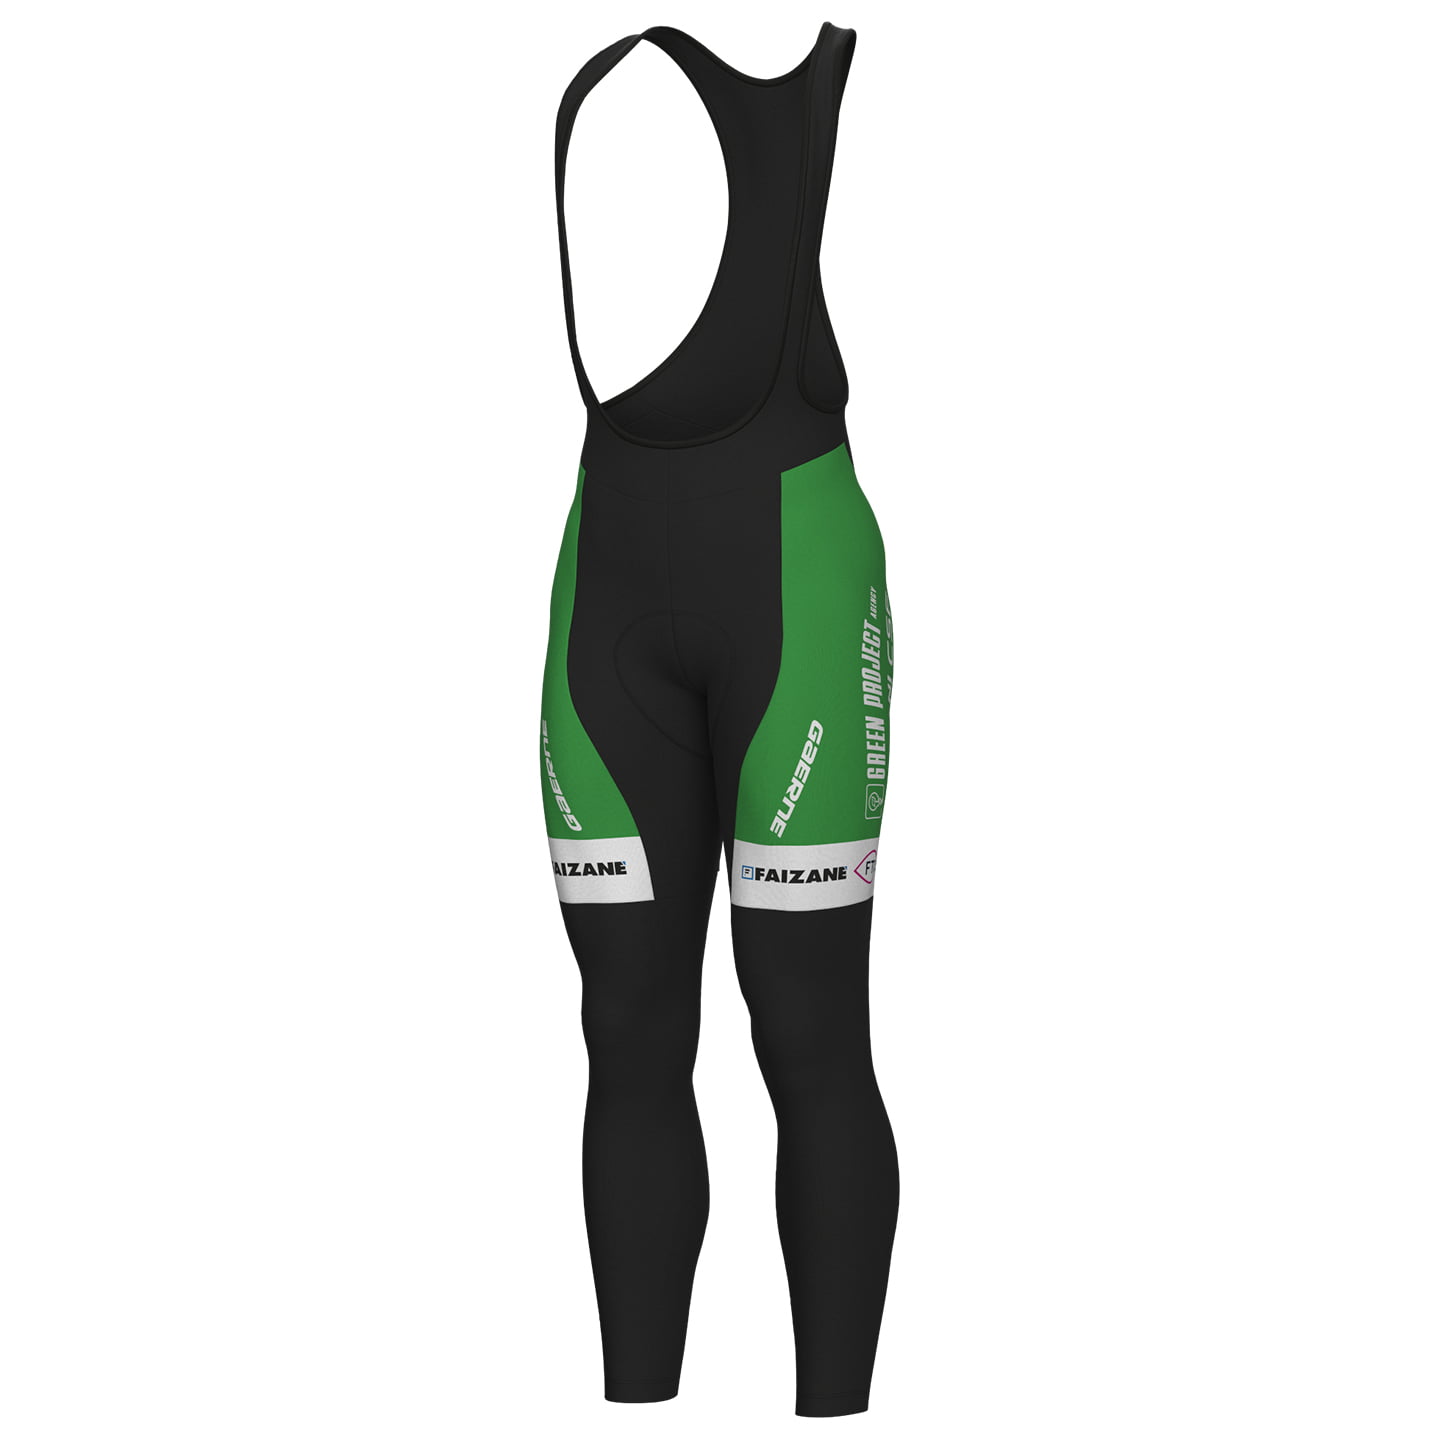 GREEN PROJECT-BARDIANI CSF-FAIZANE 2023 Bib Tights, for men, size XL, Cycle trousers, Cycle clothing